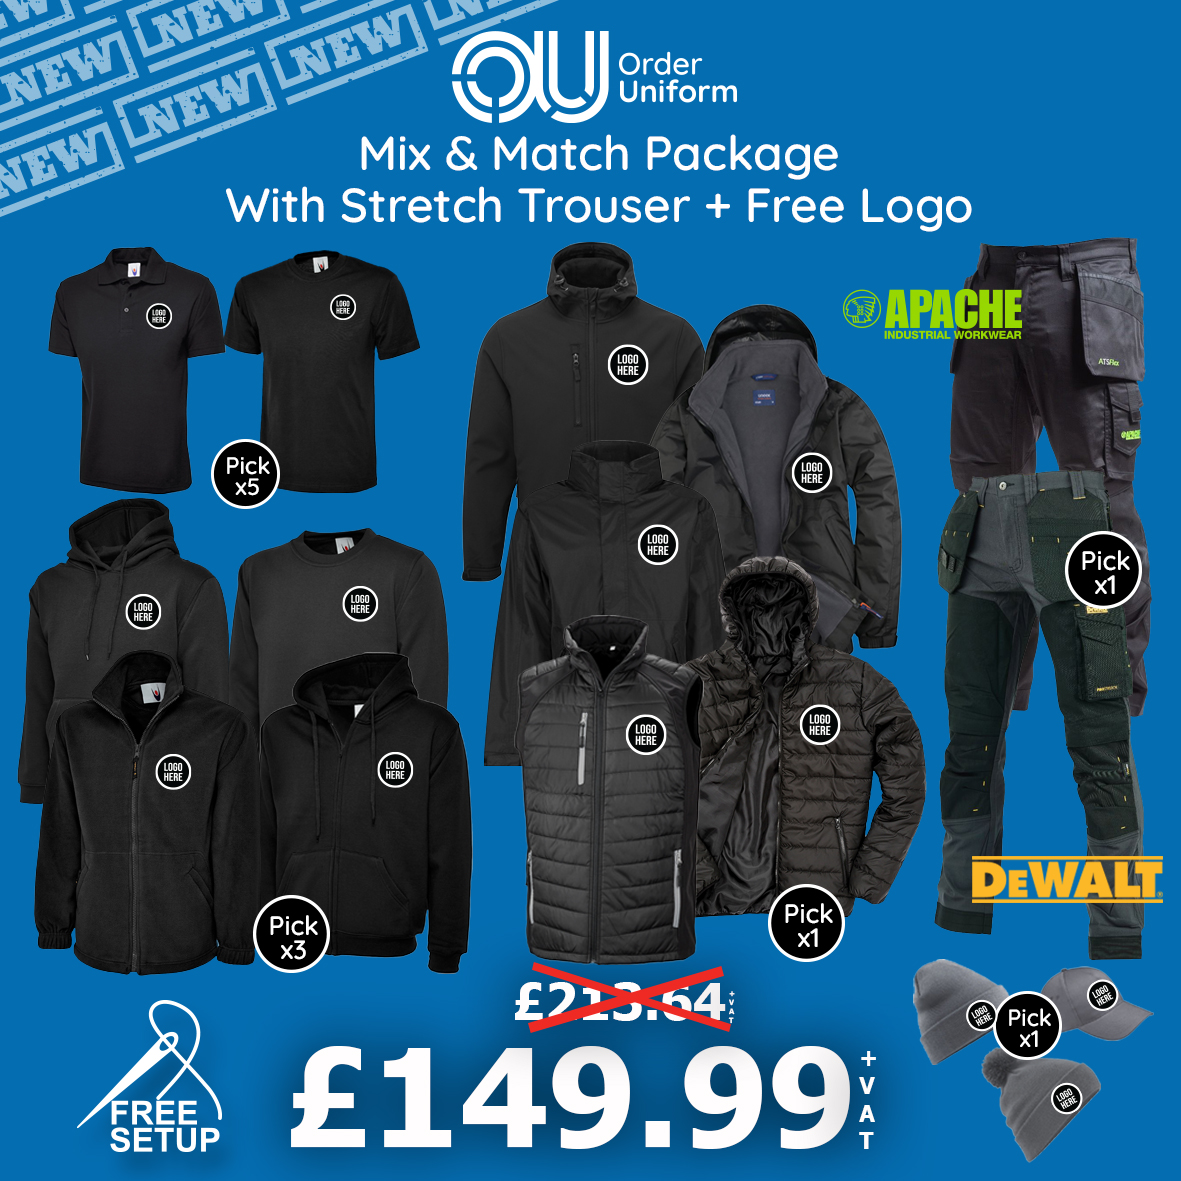 Mix & Match Package With Stretch Trouser + Free Logo 0